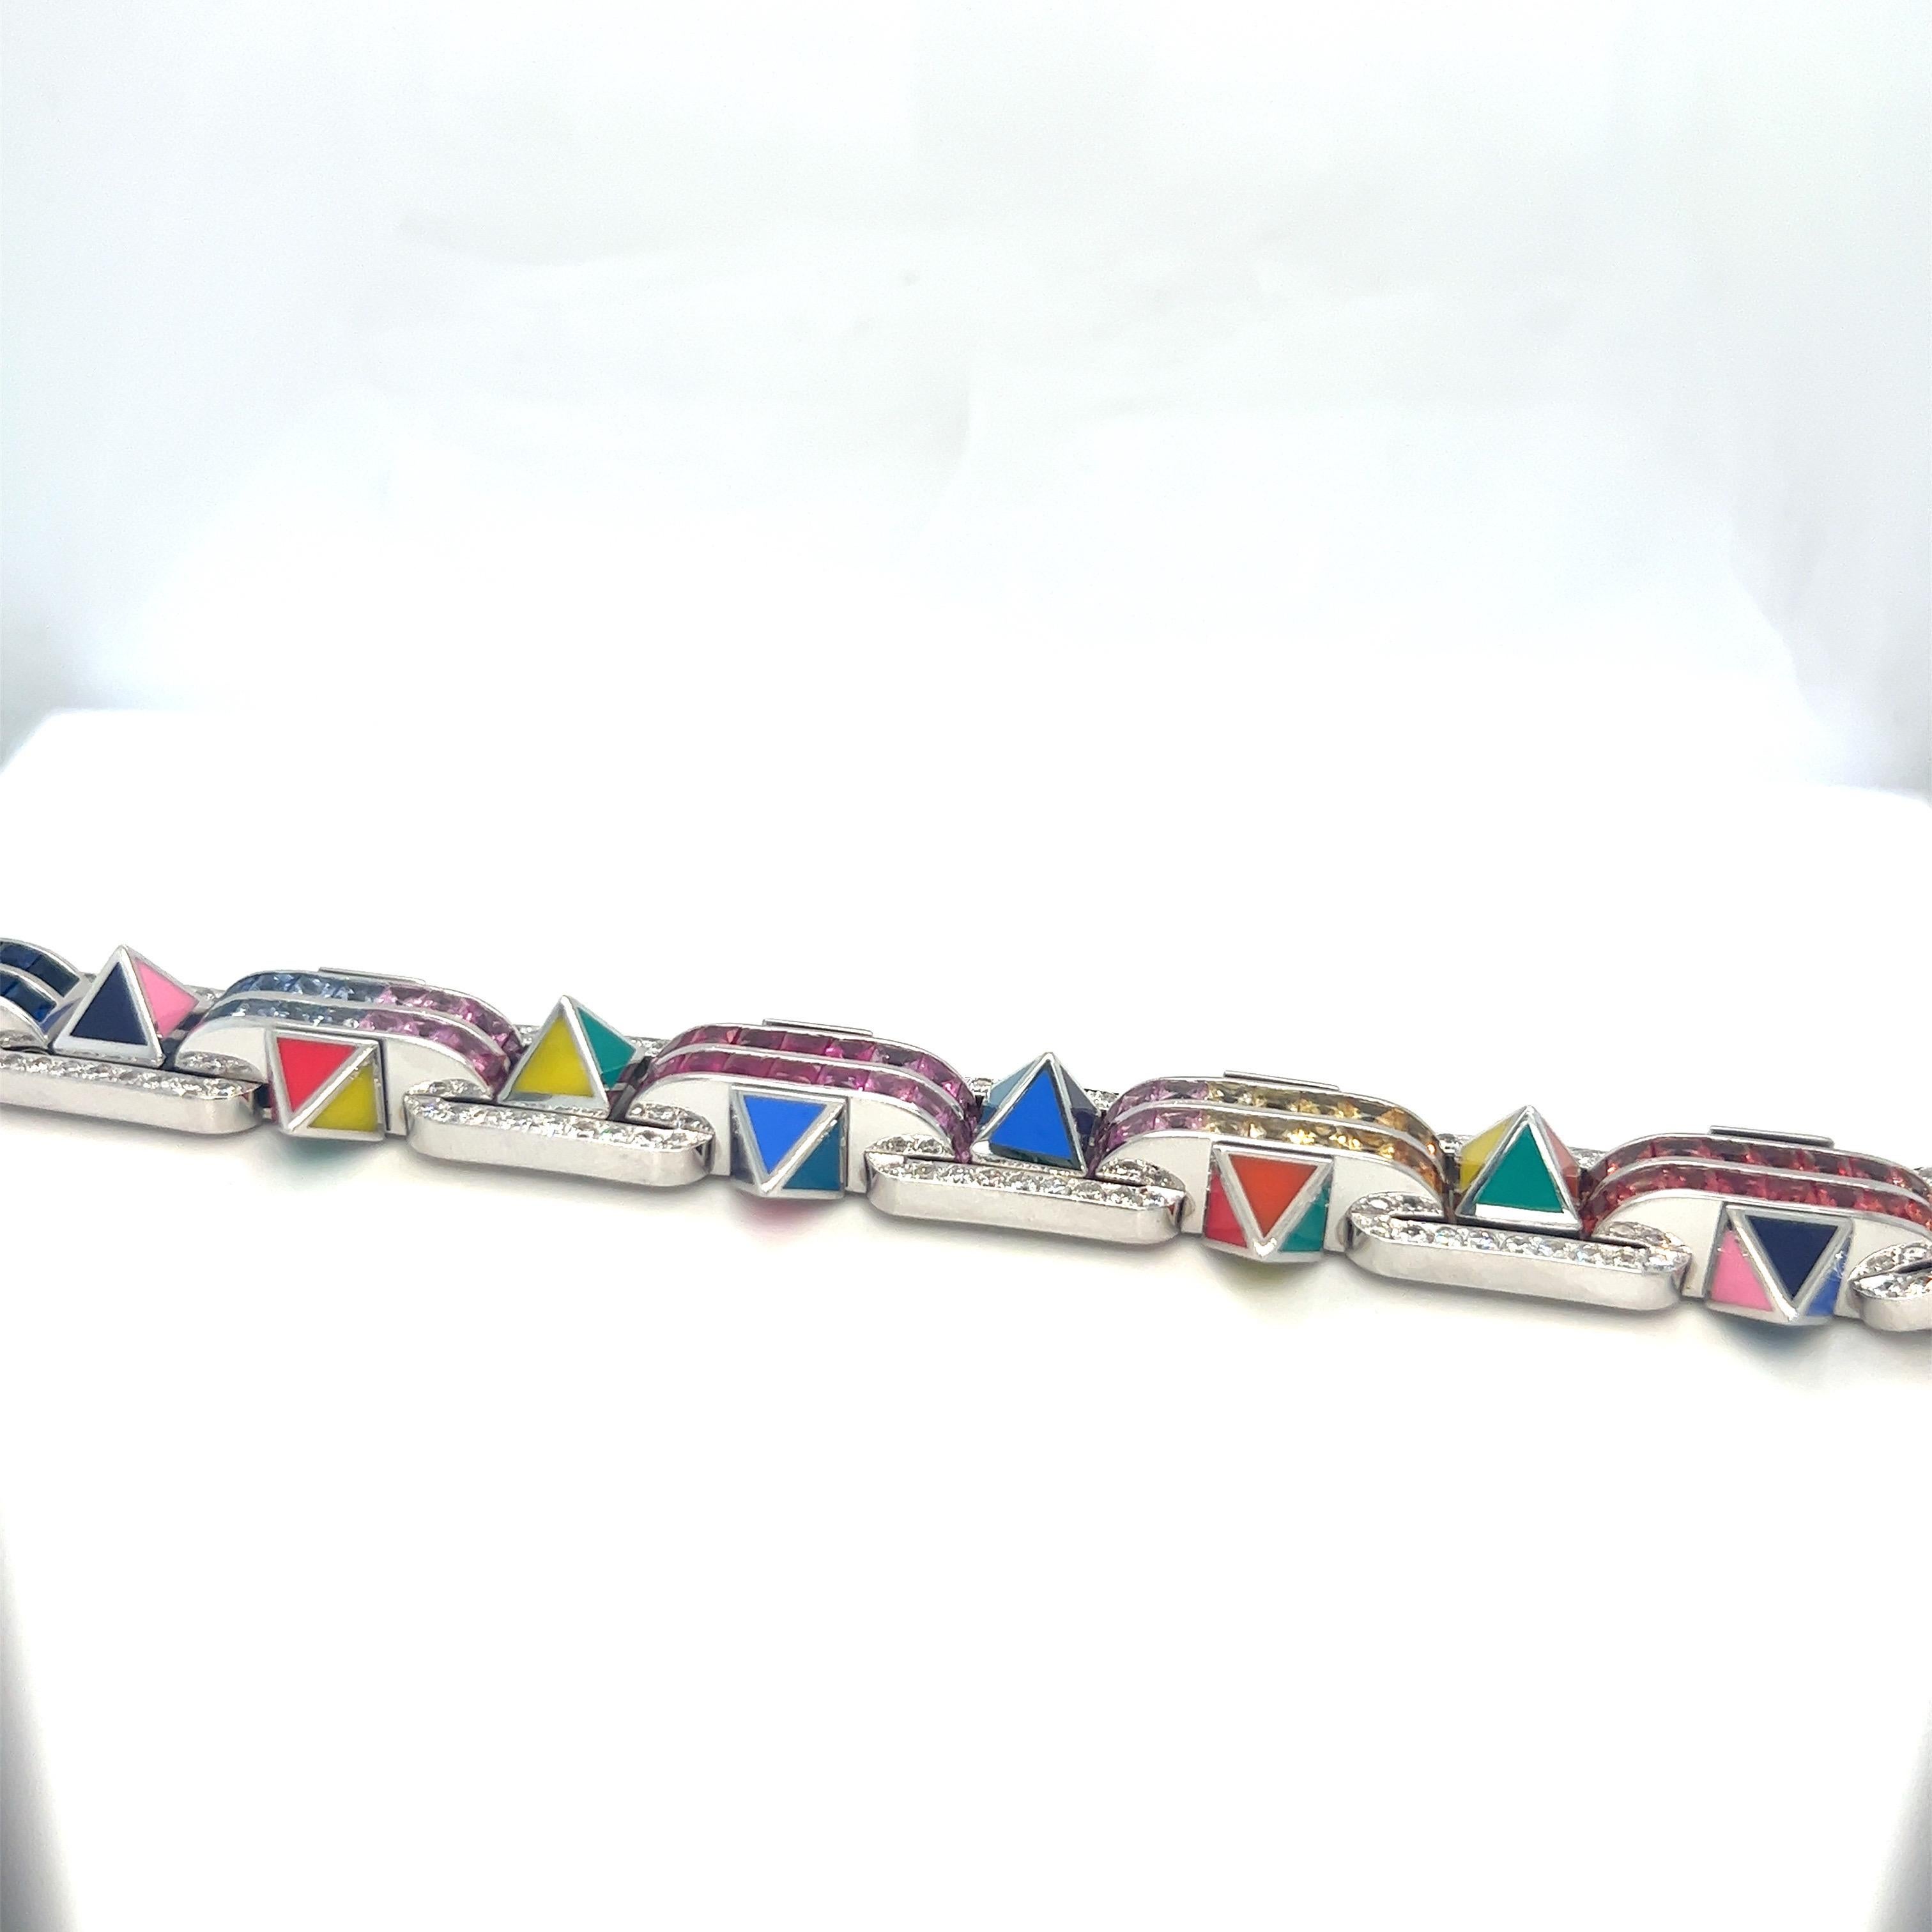 18KT WG 2.84Ct Diamond 16.15CMulti-Colored Sapphires and Enamel Bracelet In New Condition For Sale In New York, NY